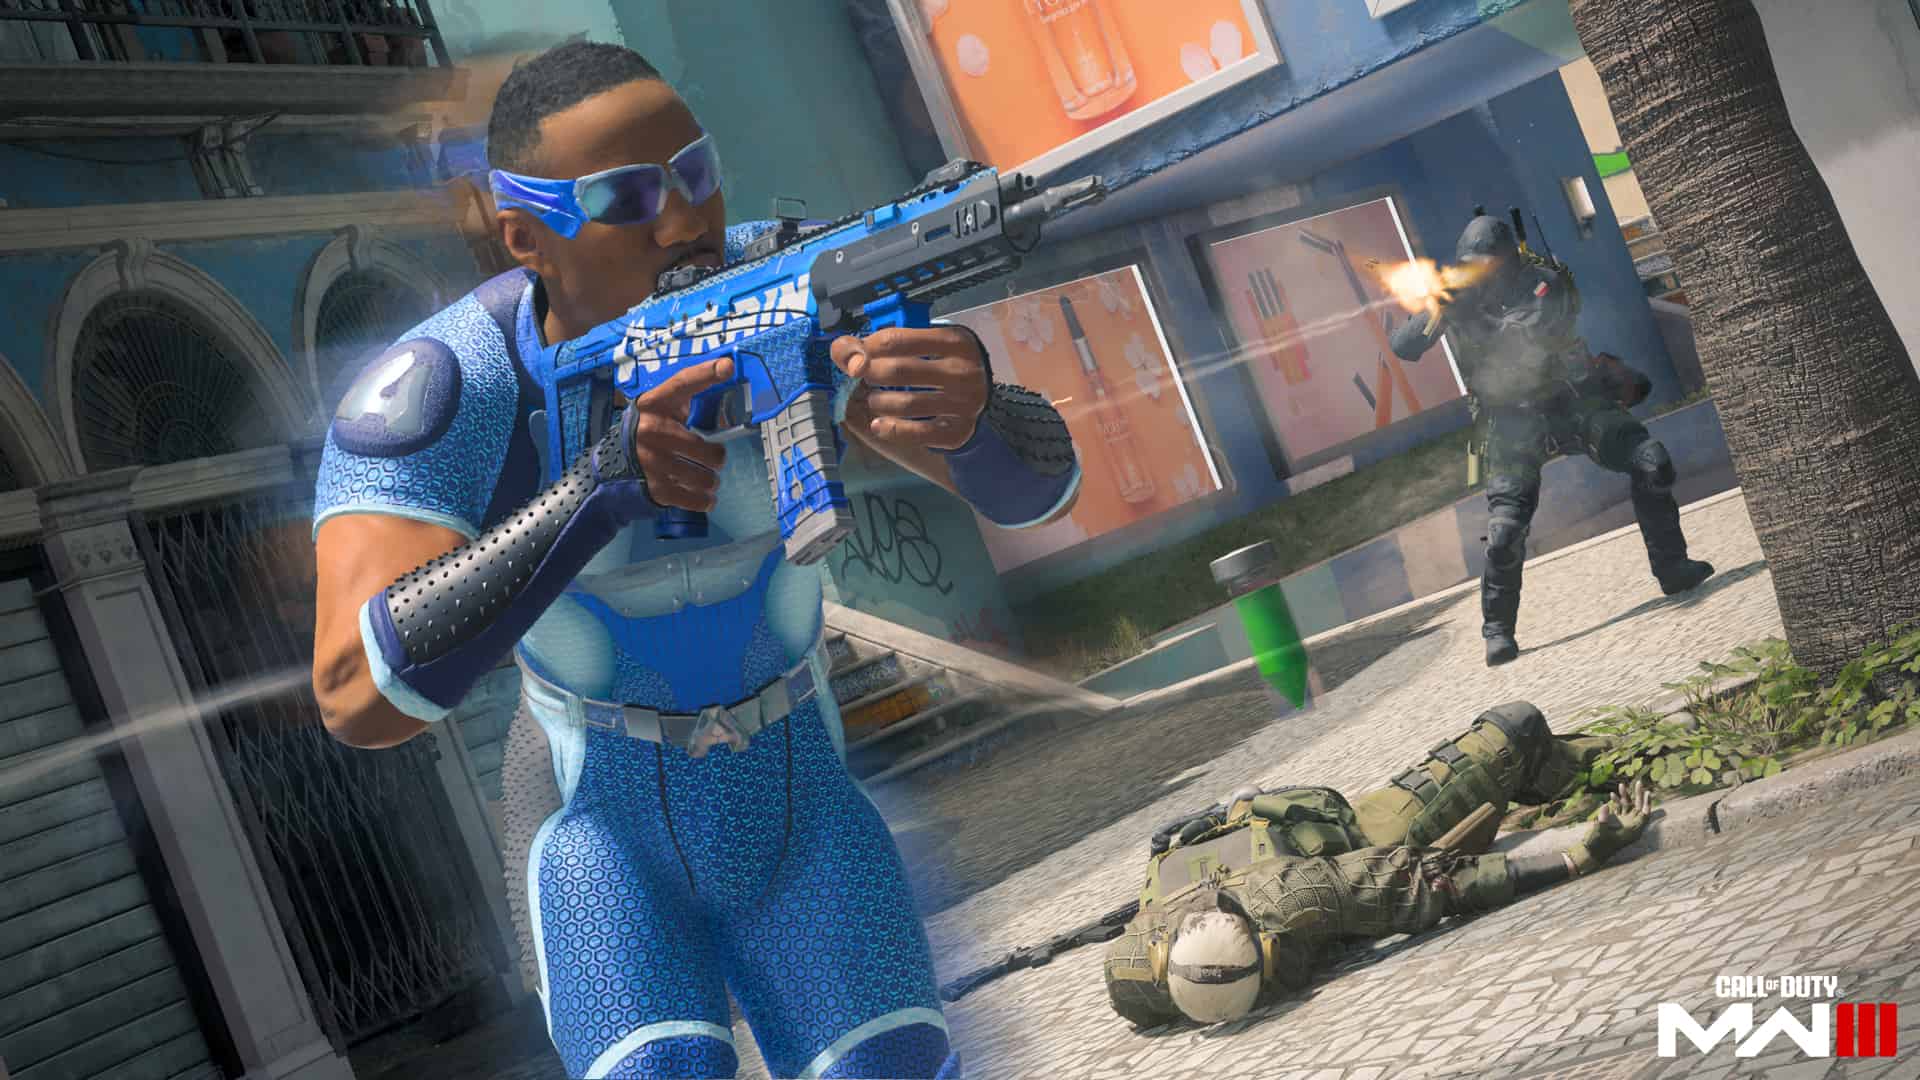 A man in a blue suit is holding a gun from one of the MW3 Season 1 Reloaded bundles.